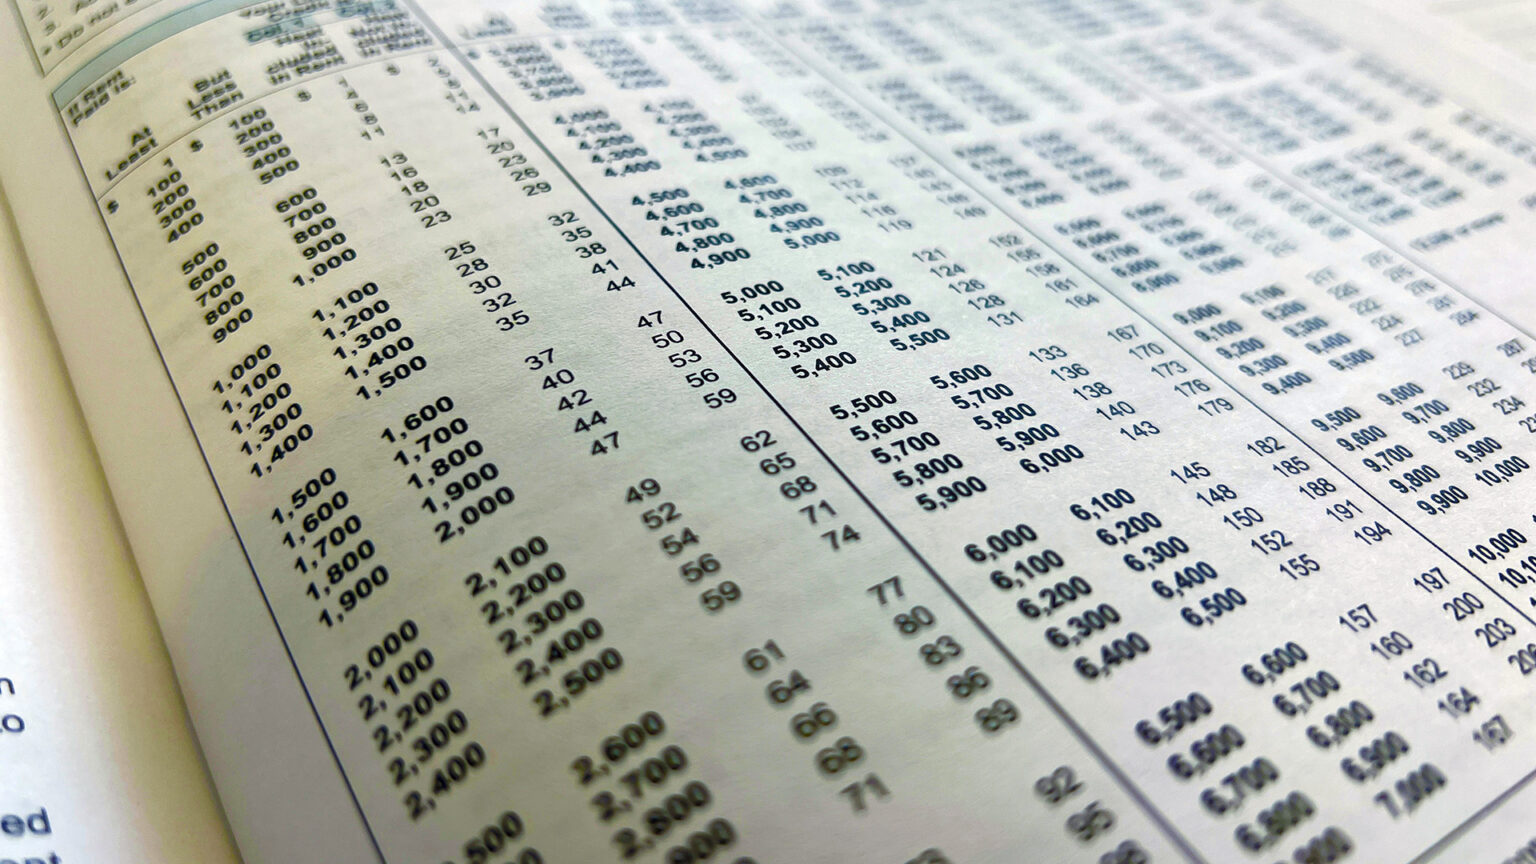 A page in an instructional tax booklet shows columns of income levels and associated taxation amounts for each.